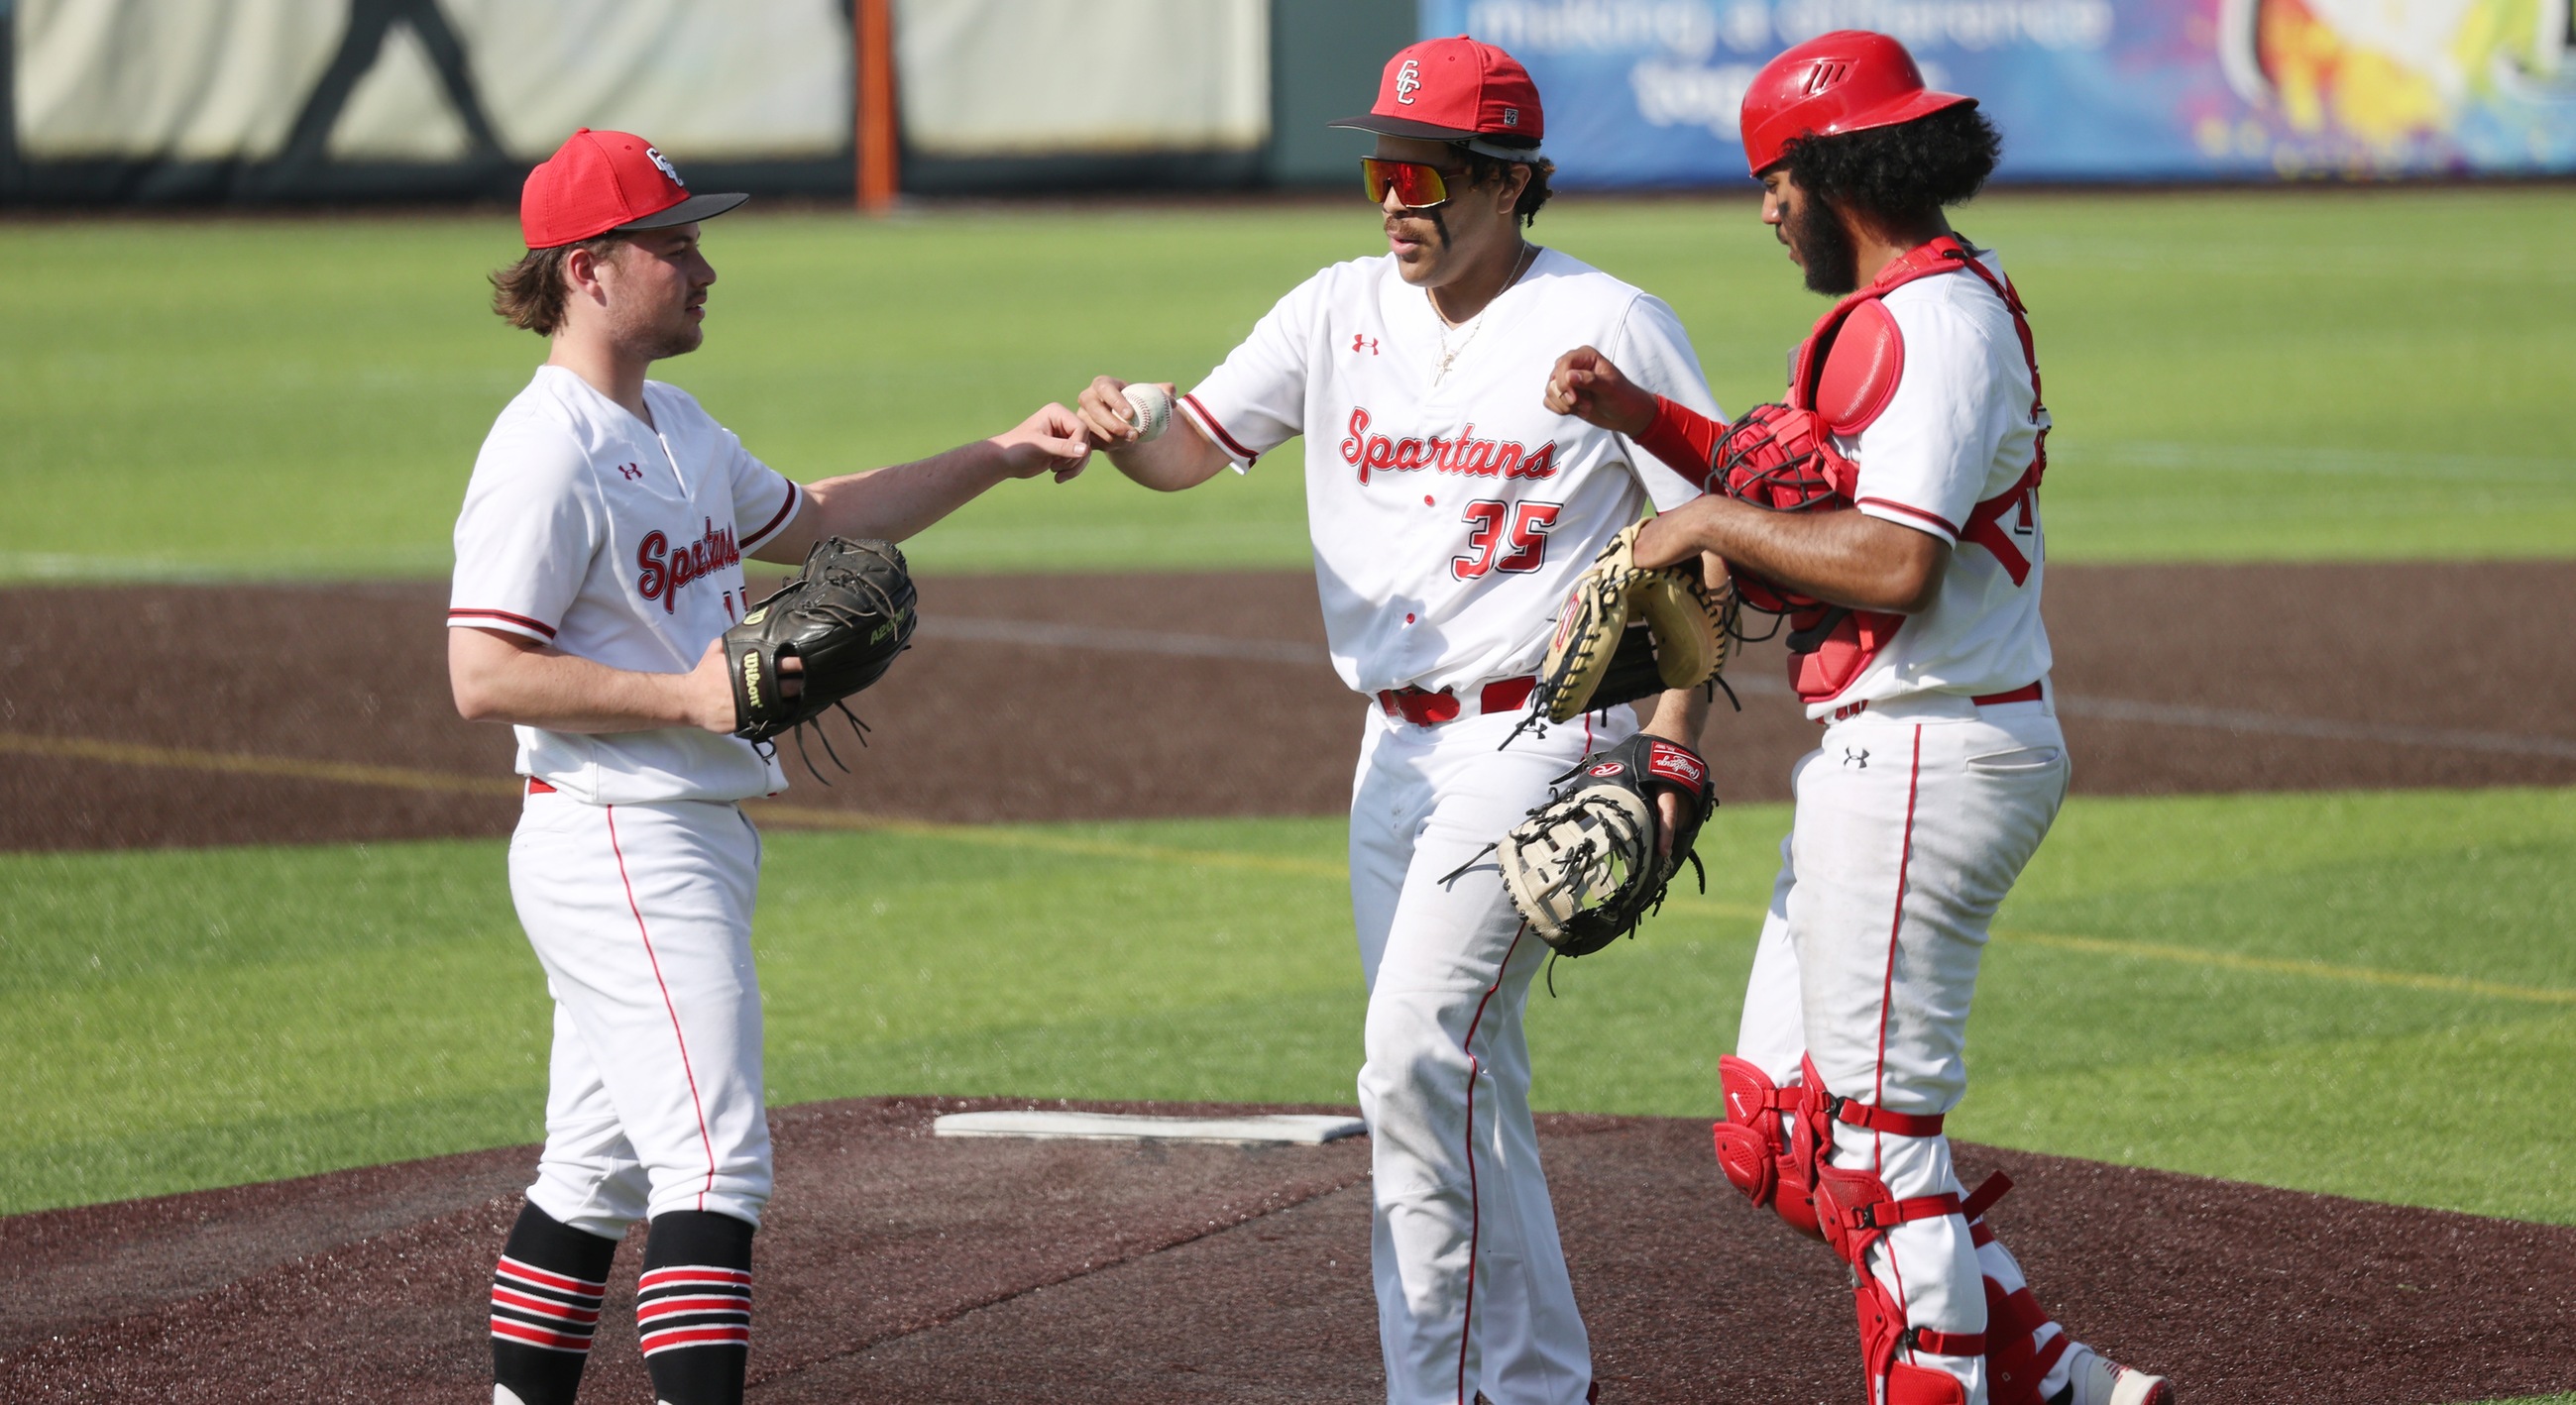 Juan Perez (center) and Antonio Munoz, right, congratulate Jared King after he threw three scoreless innings in the Spartans' 4-0 win over OCC on Wednesday.